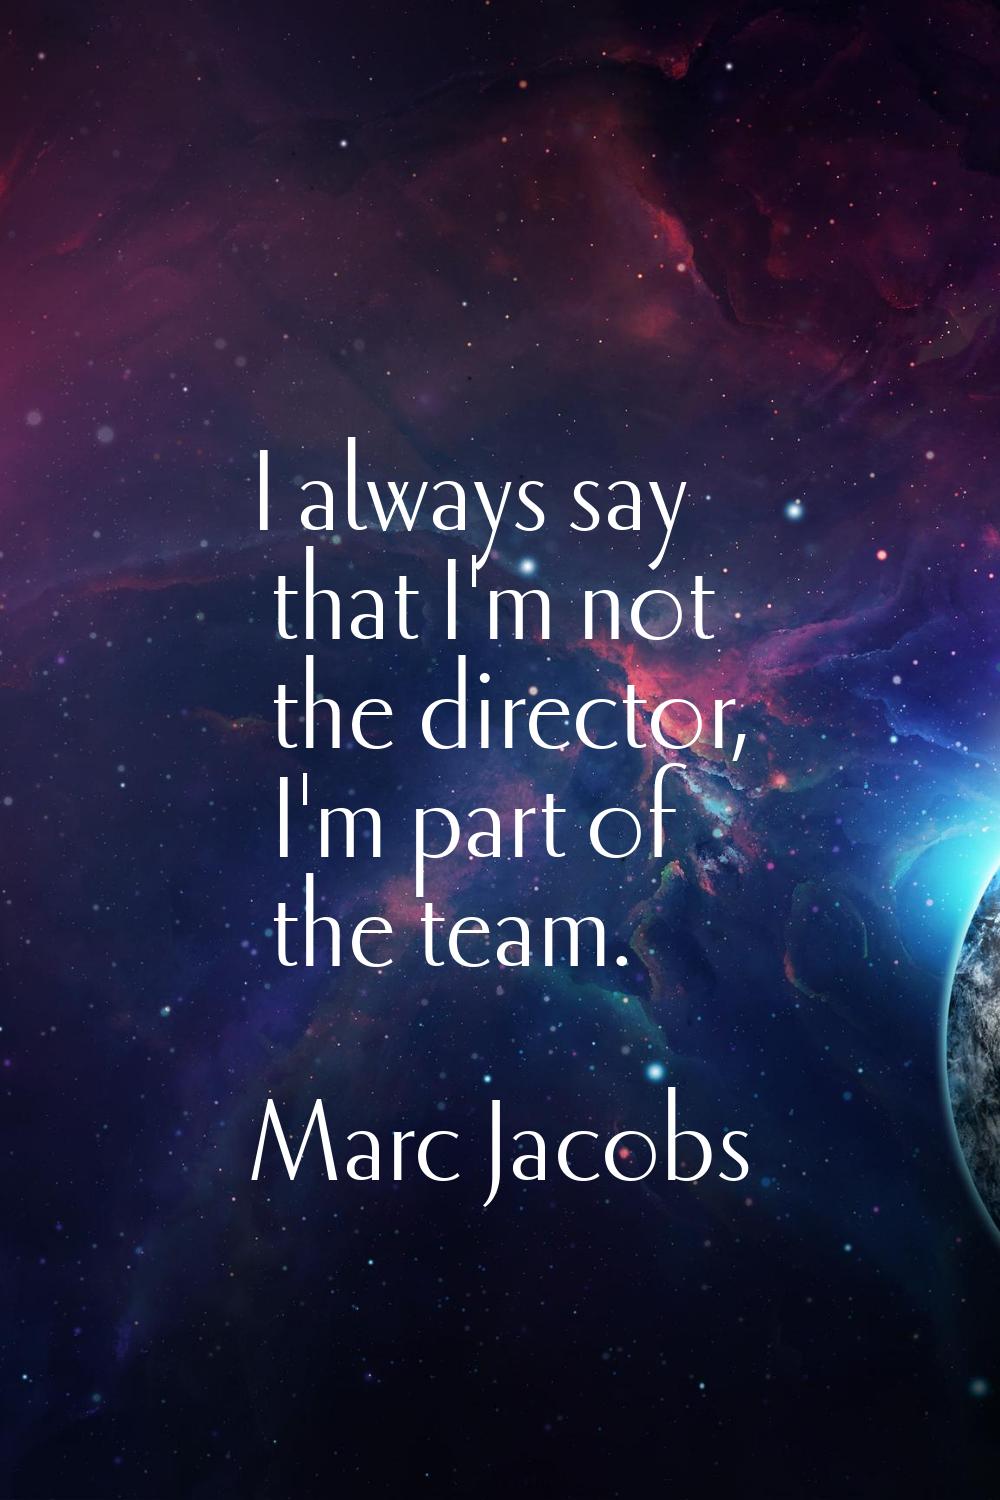 I always say that I'm not the director, I'm part of the team.